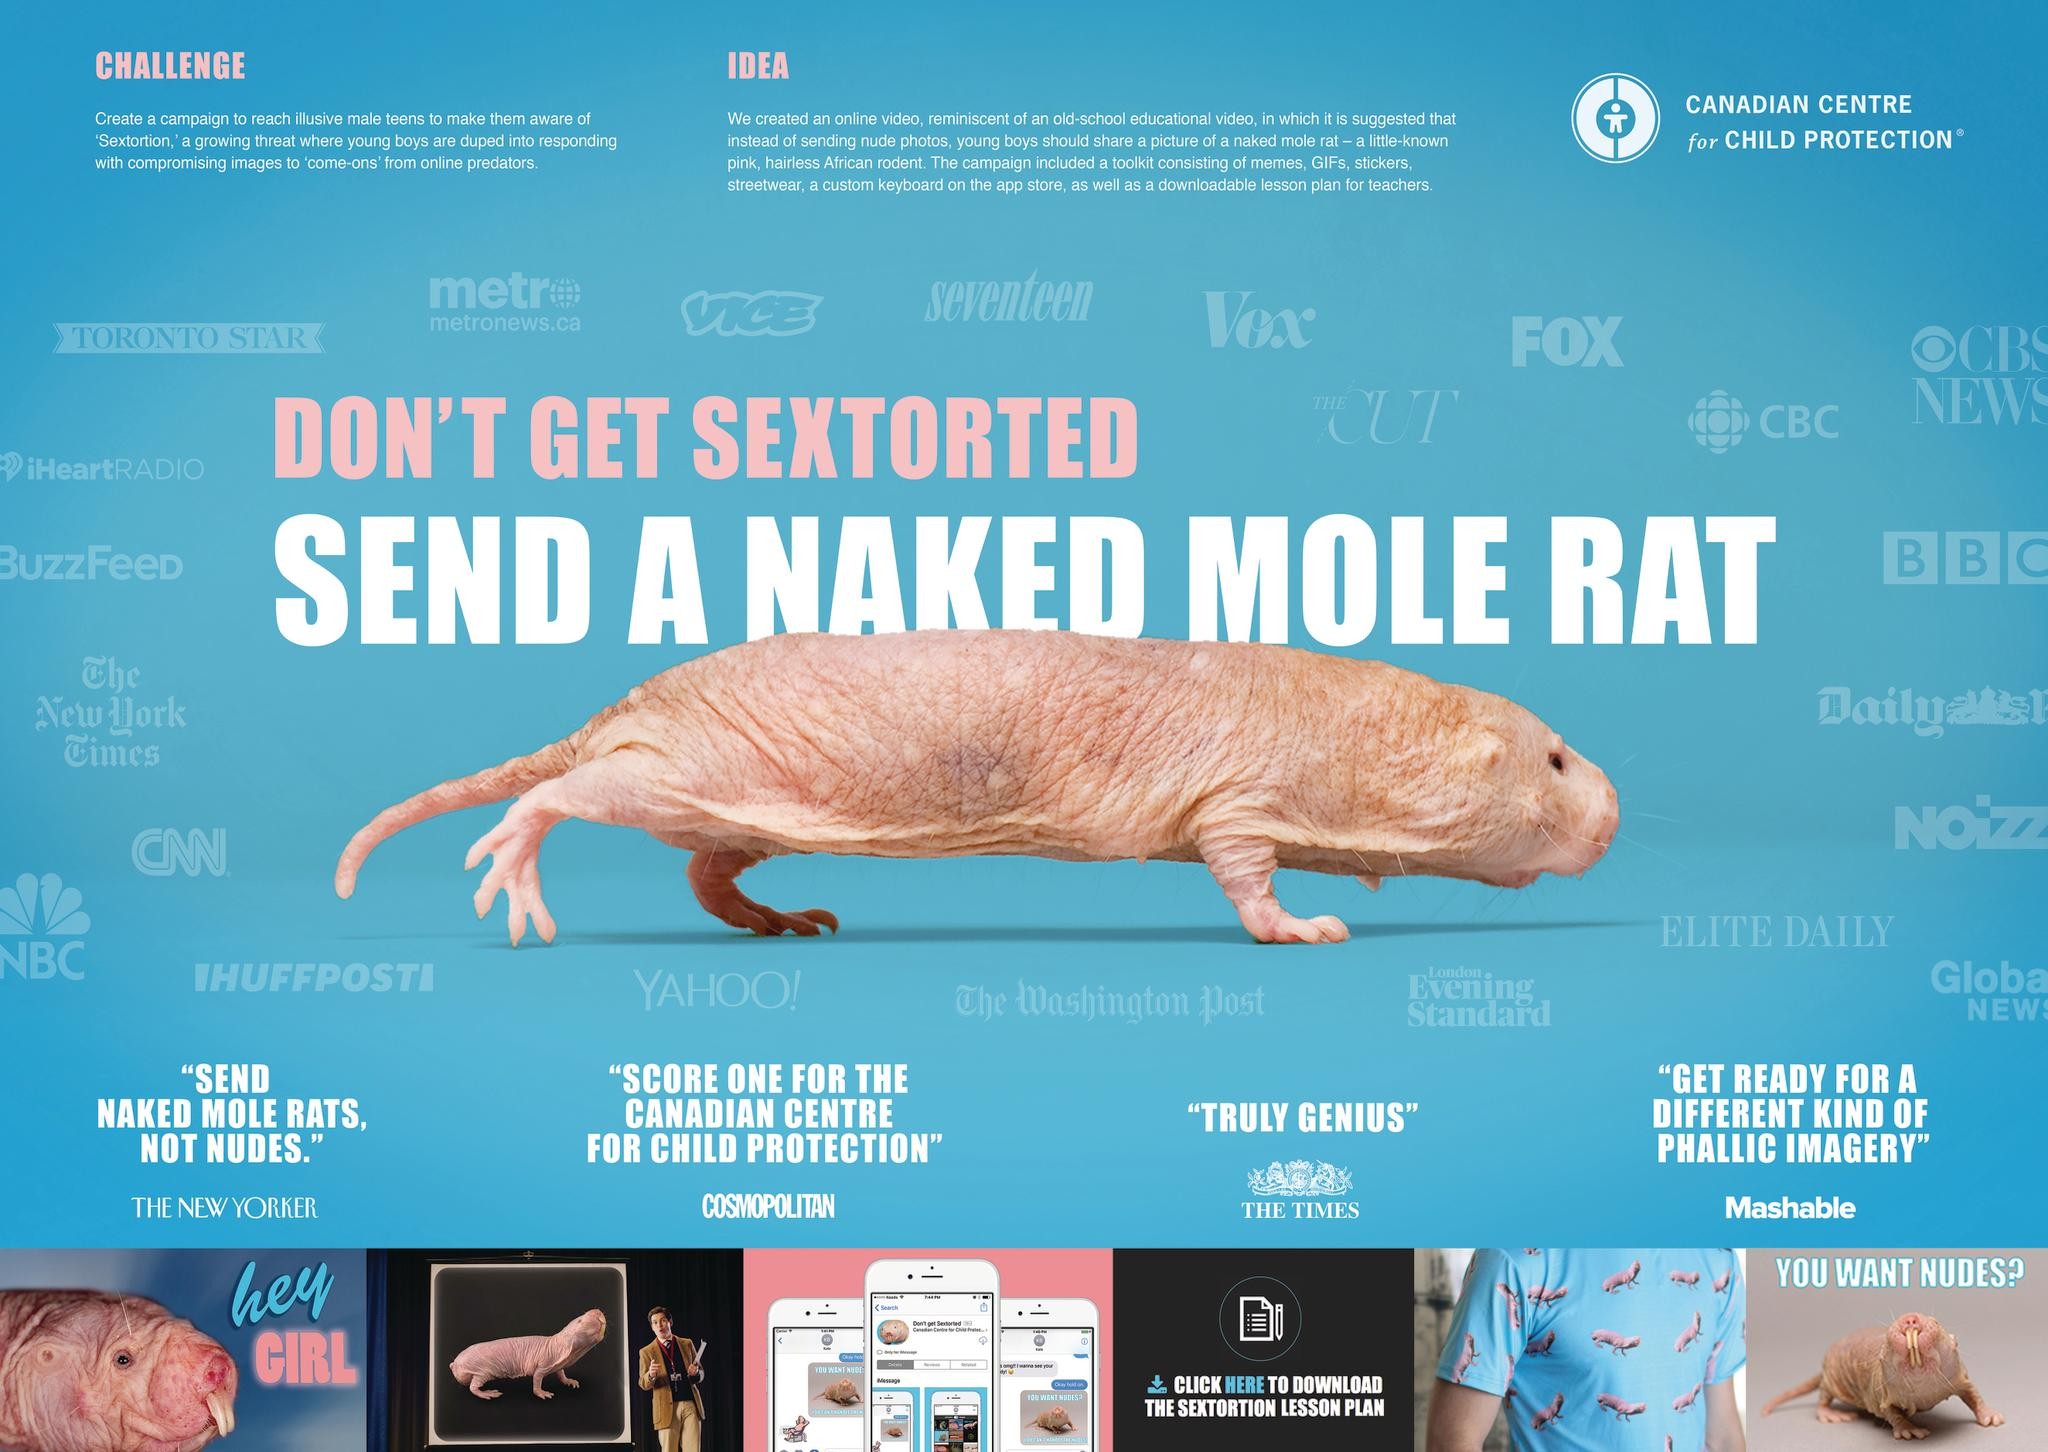 DON'T GET SEXTORTED, SEND A NAKED MOLE RAT